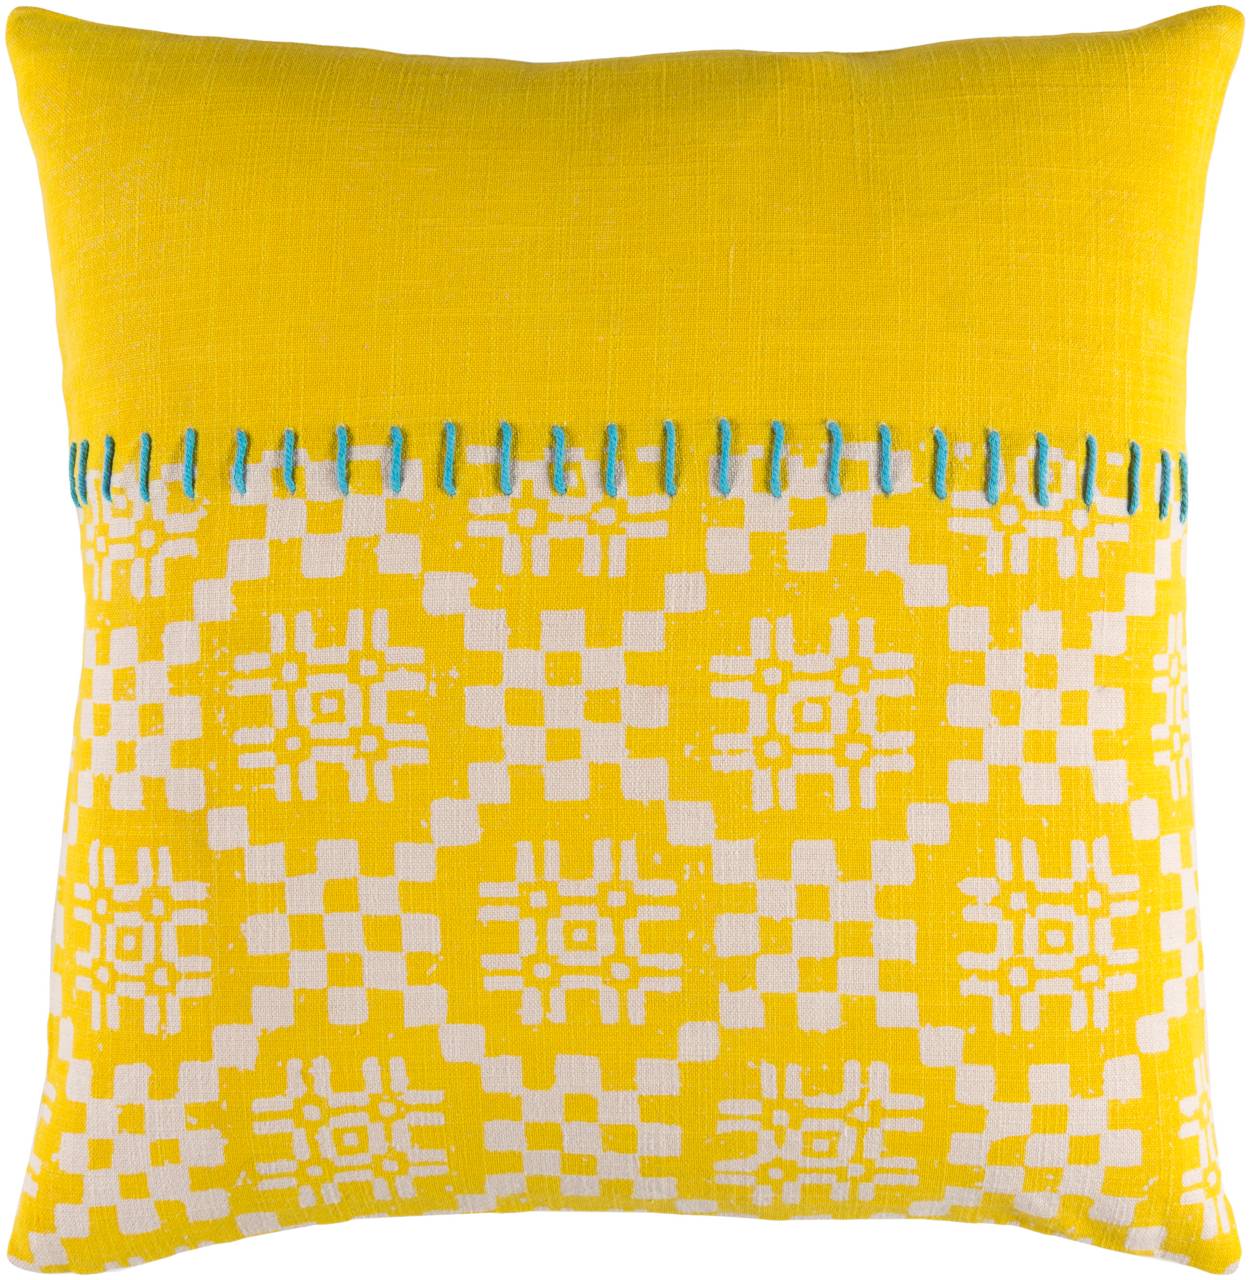 Ronse Bright Yellow Pillow Cover